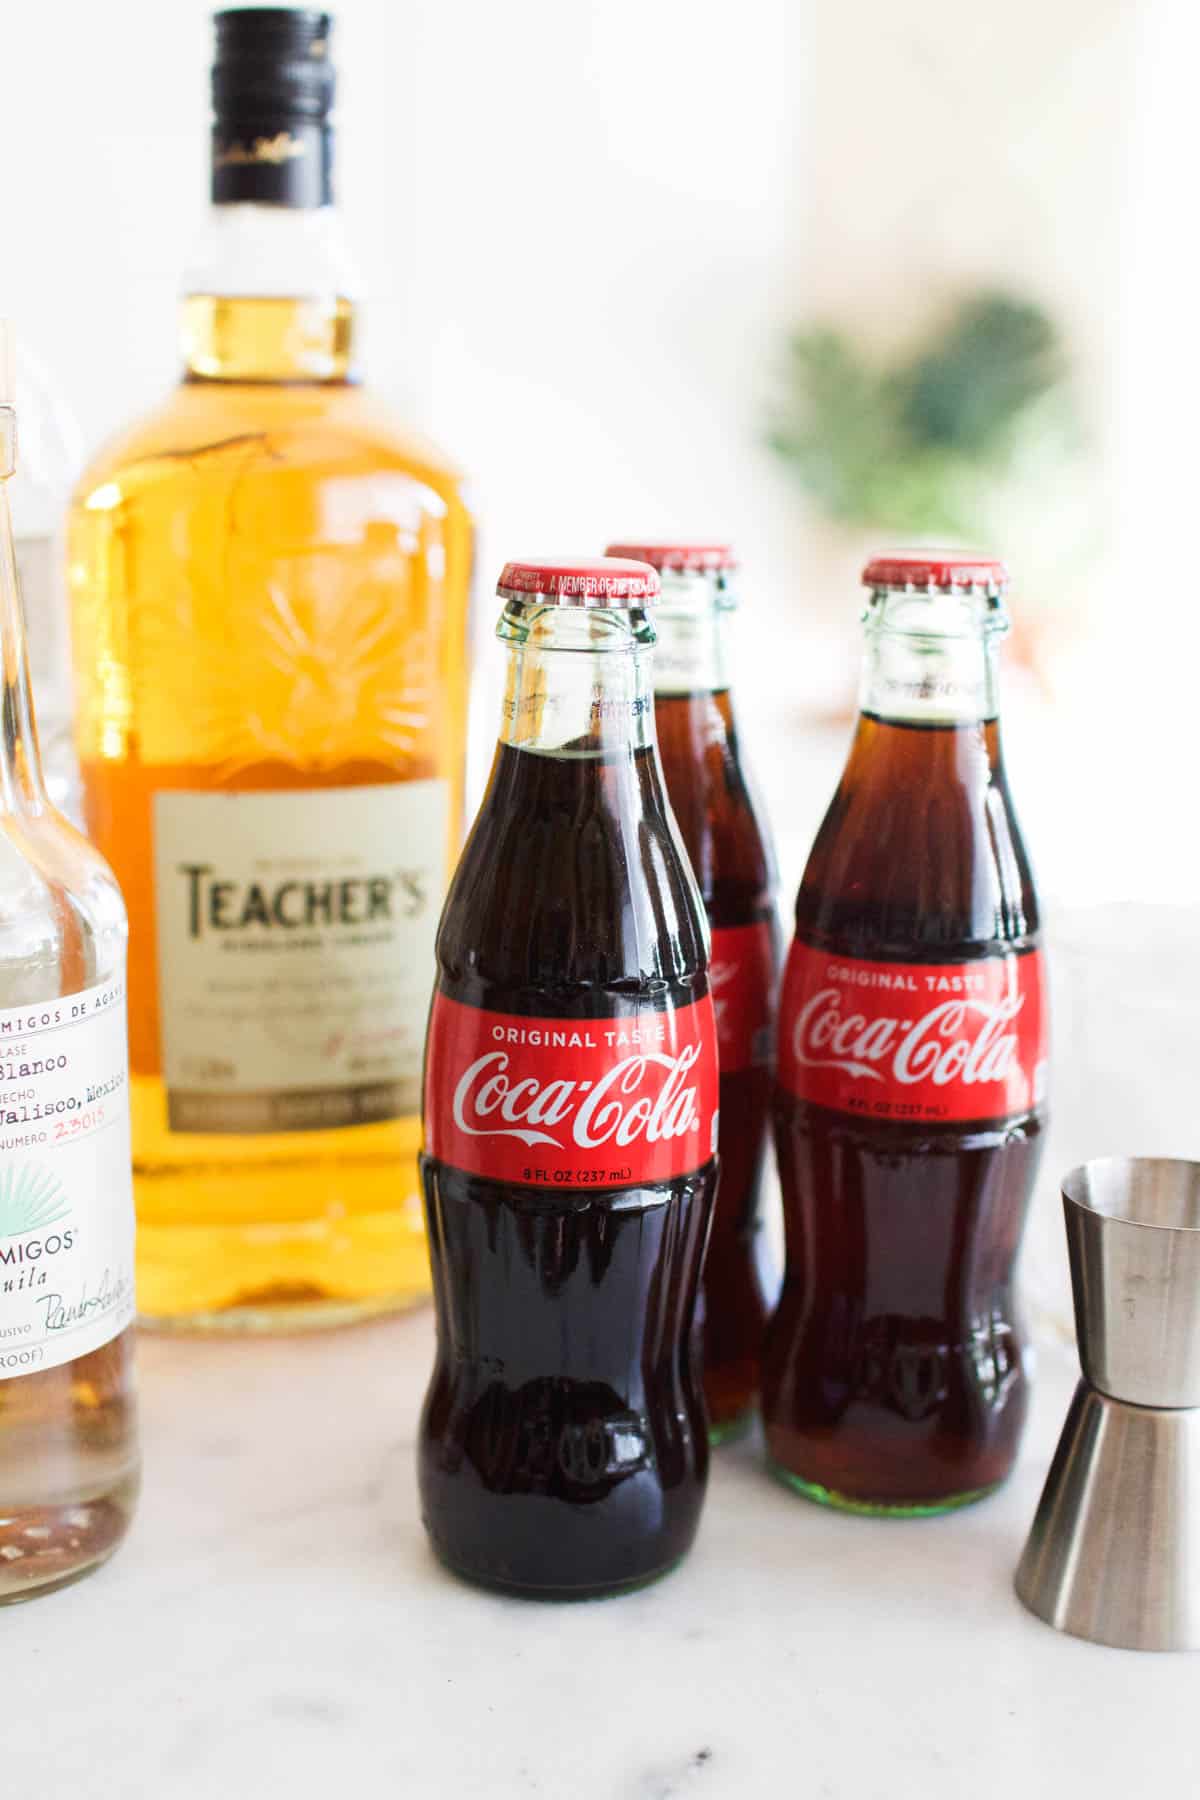 Coke bottles on a counter next to a bottle of scotch and tequila.